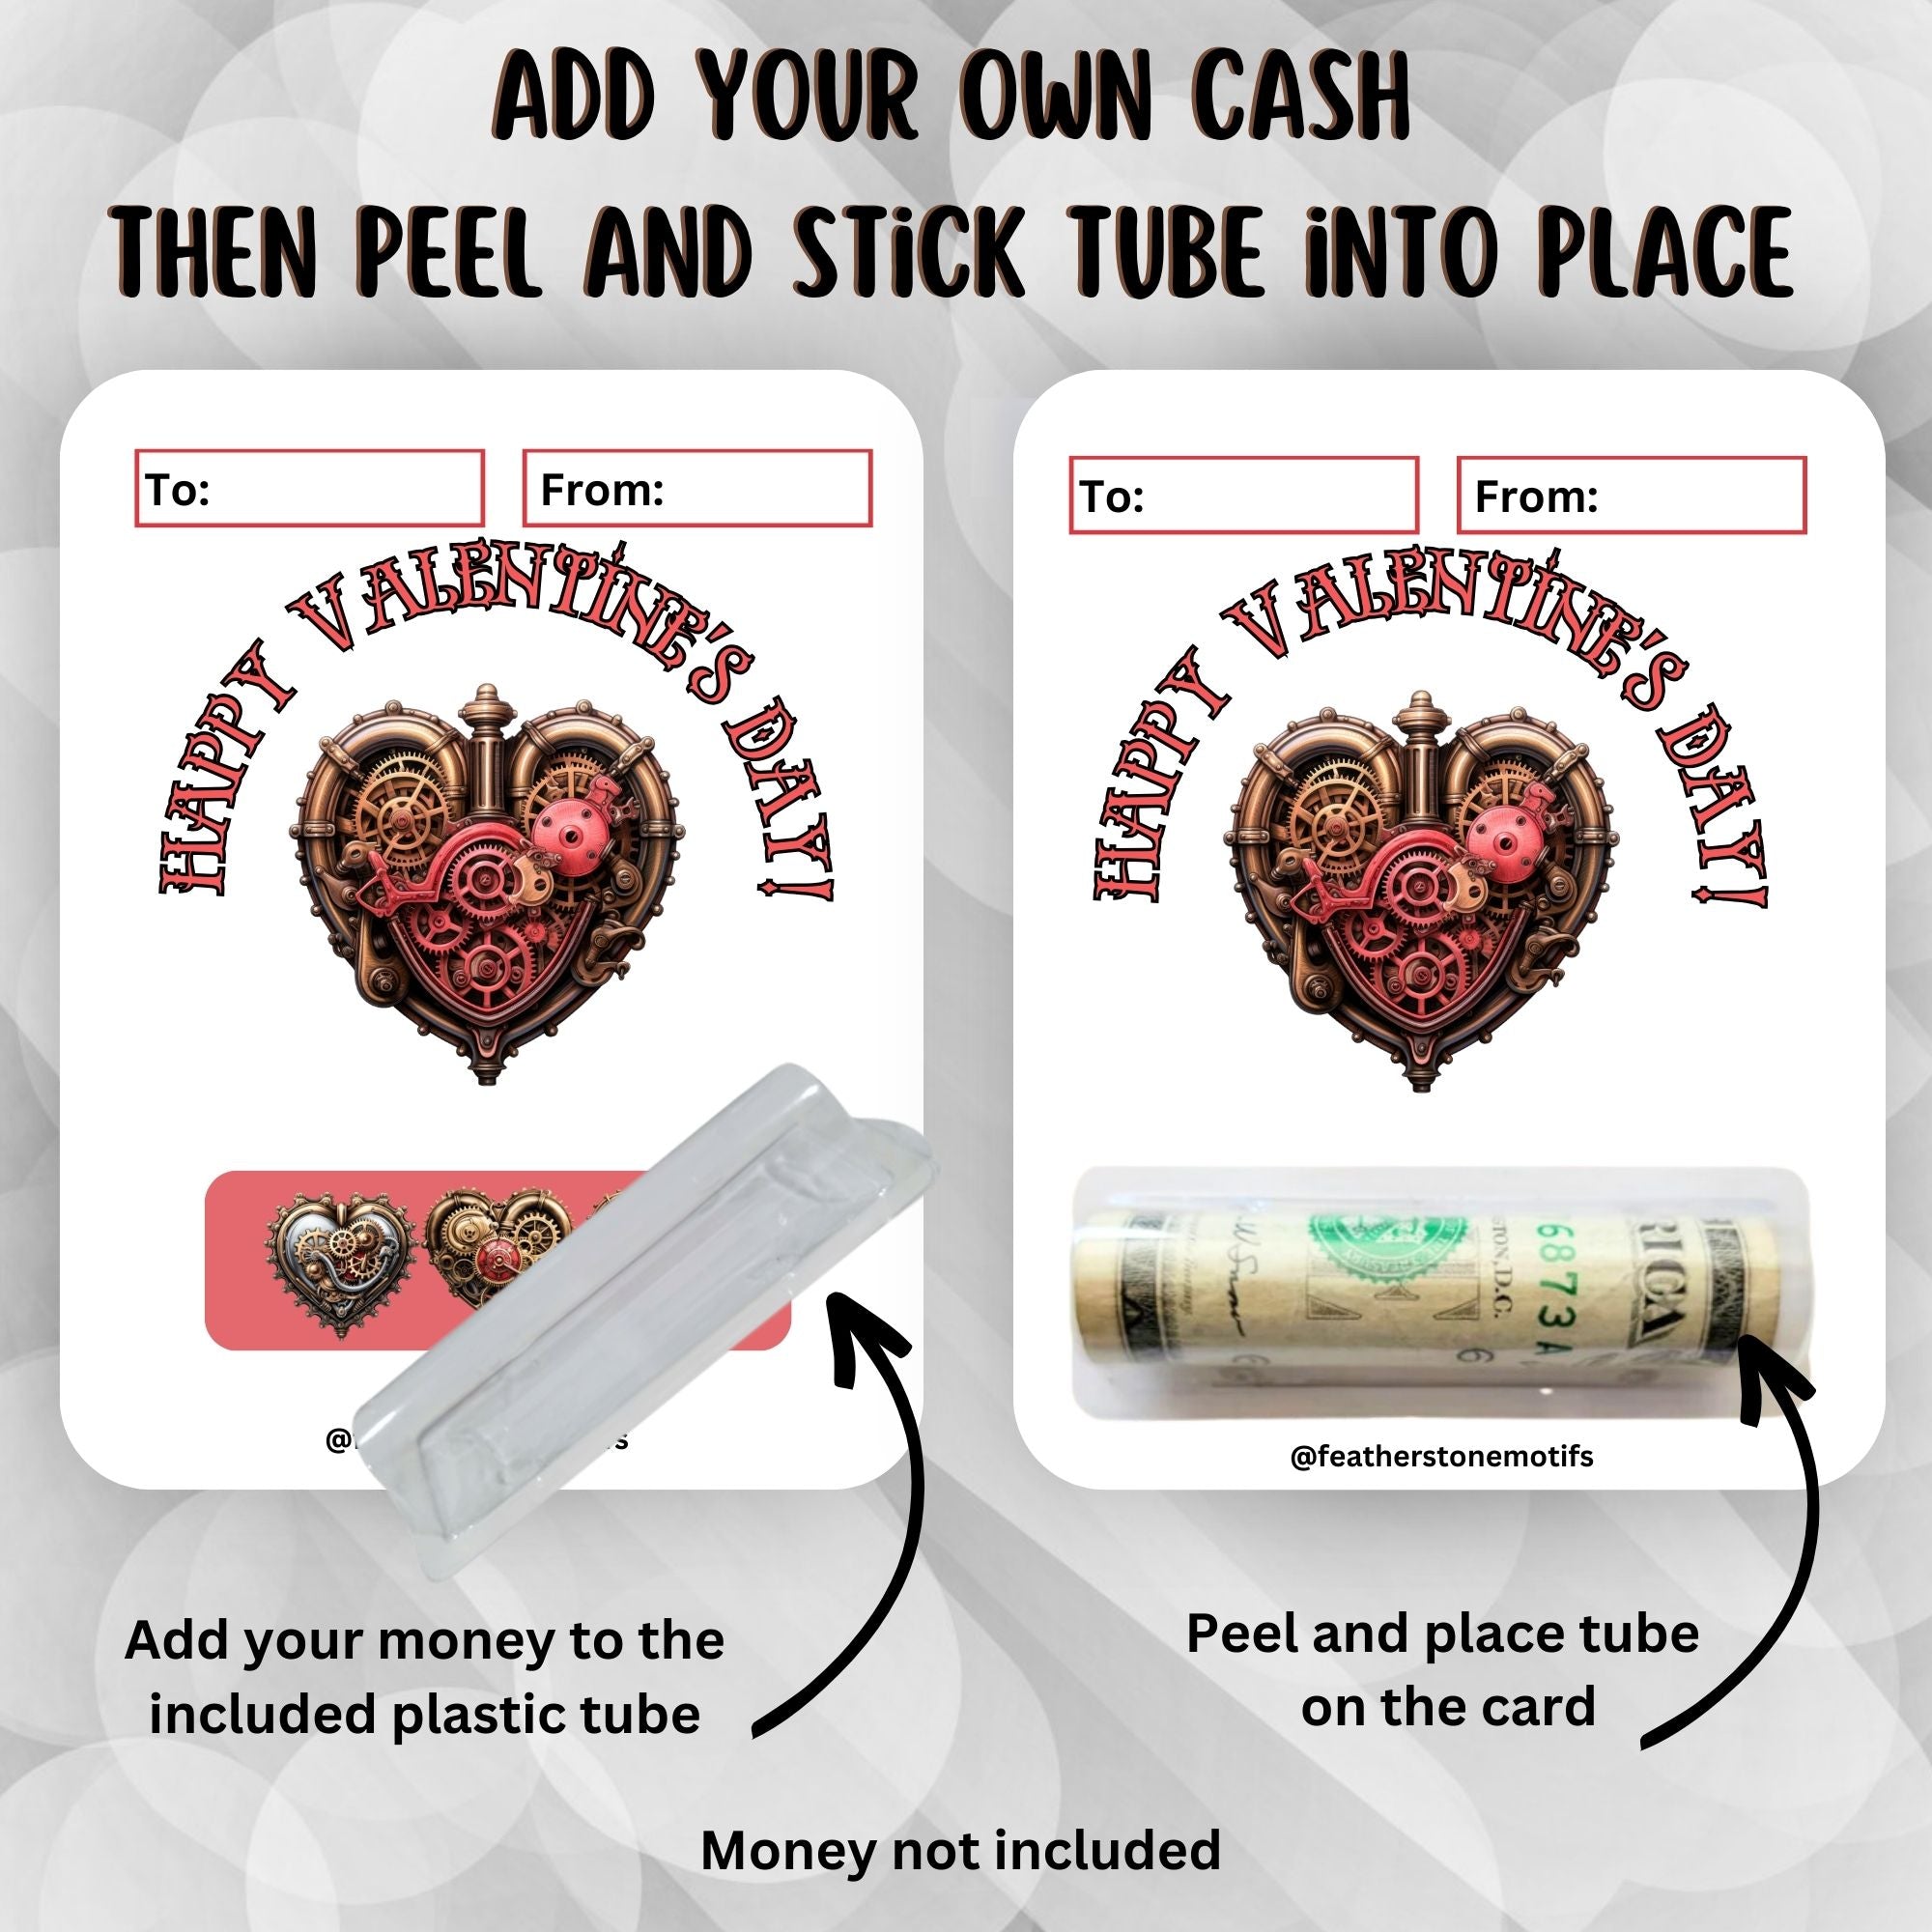 This image shows how to attach the money tube to the Steampunk Heart Valentine Money Card.